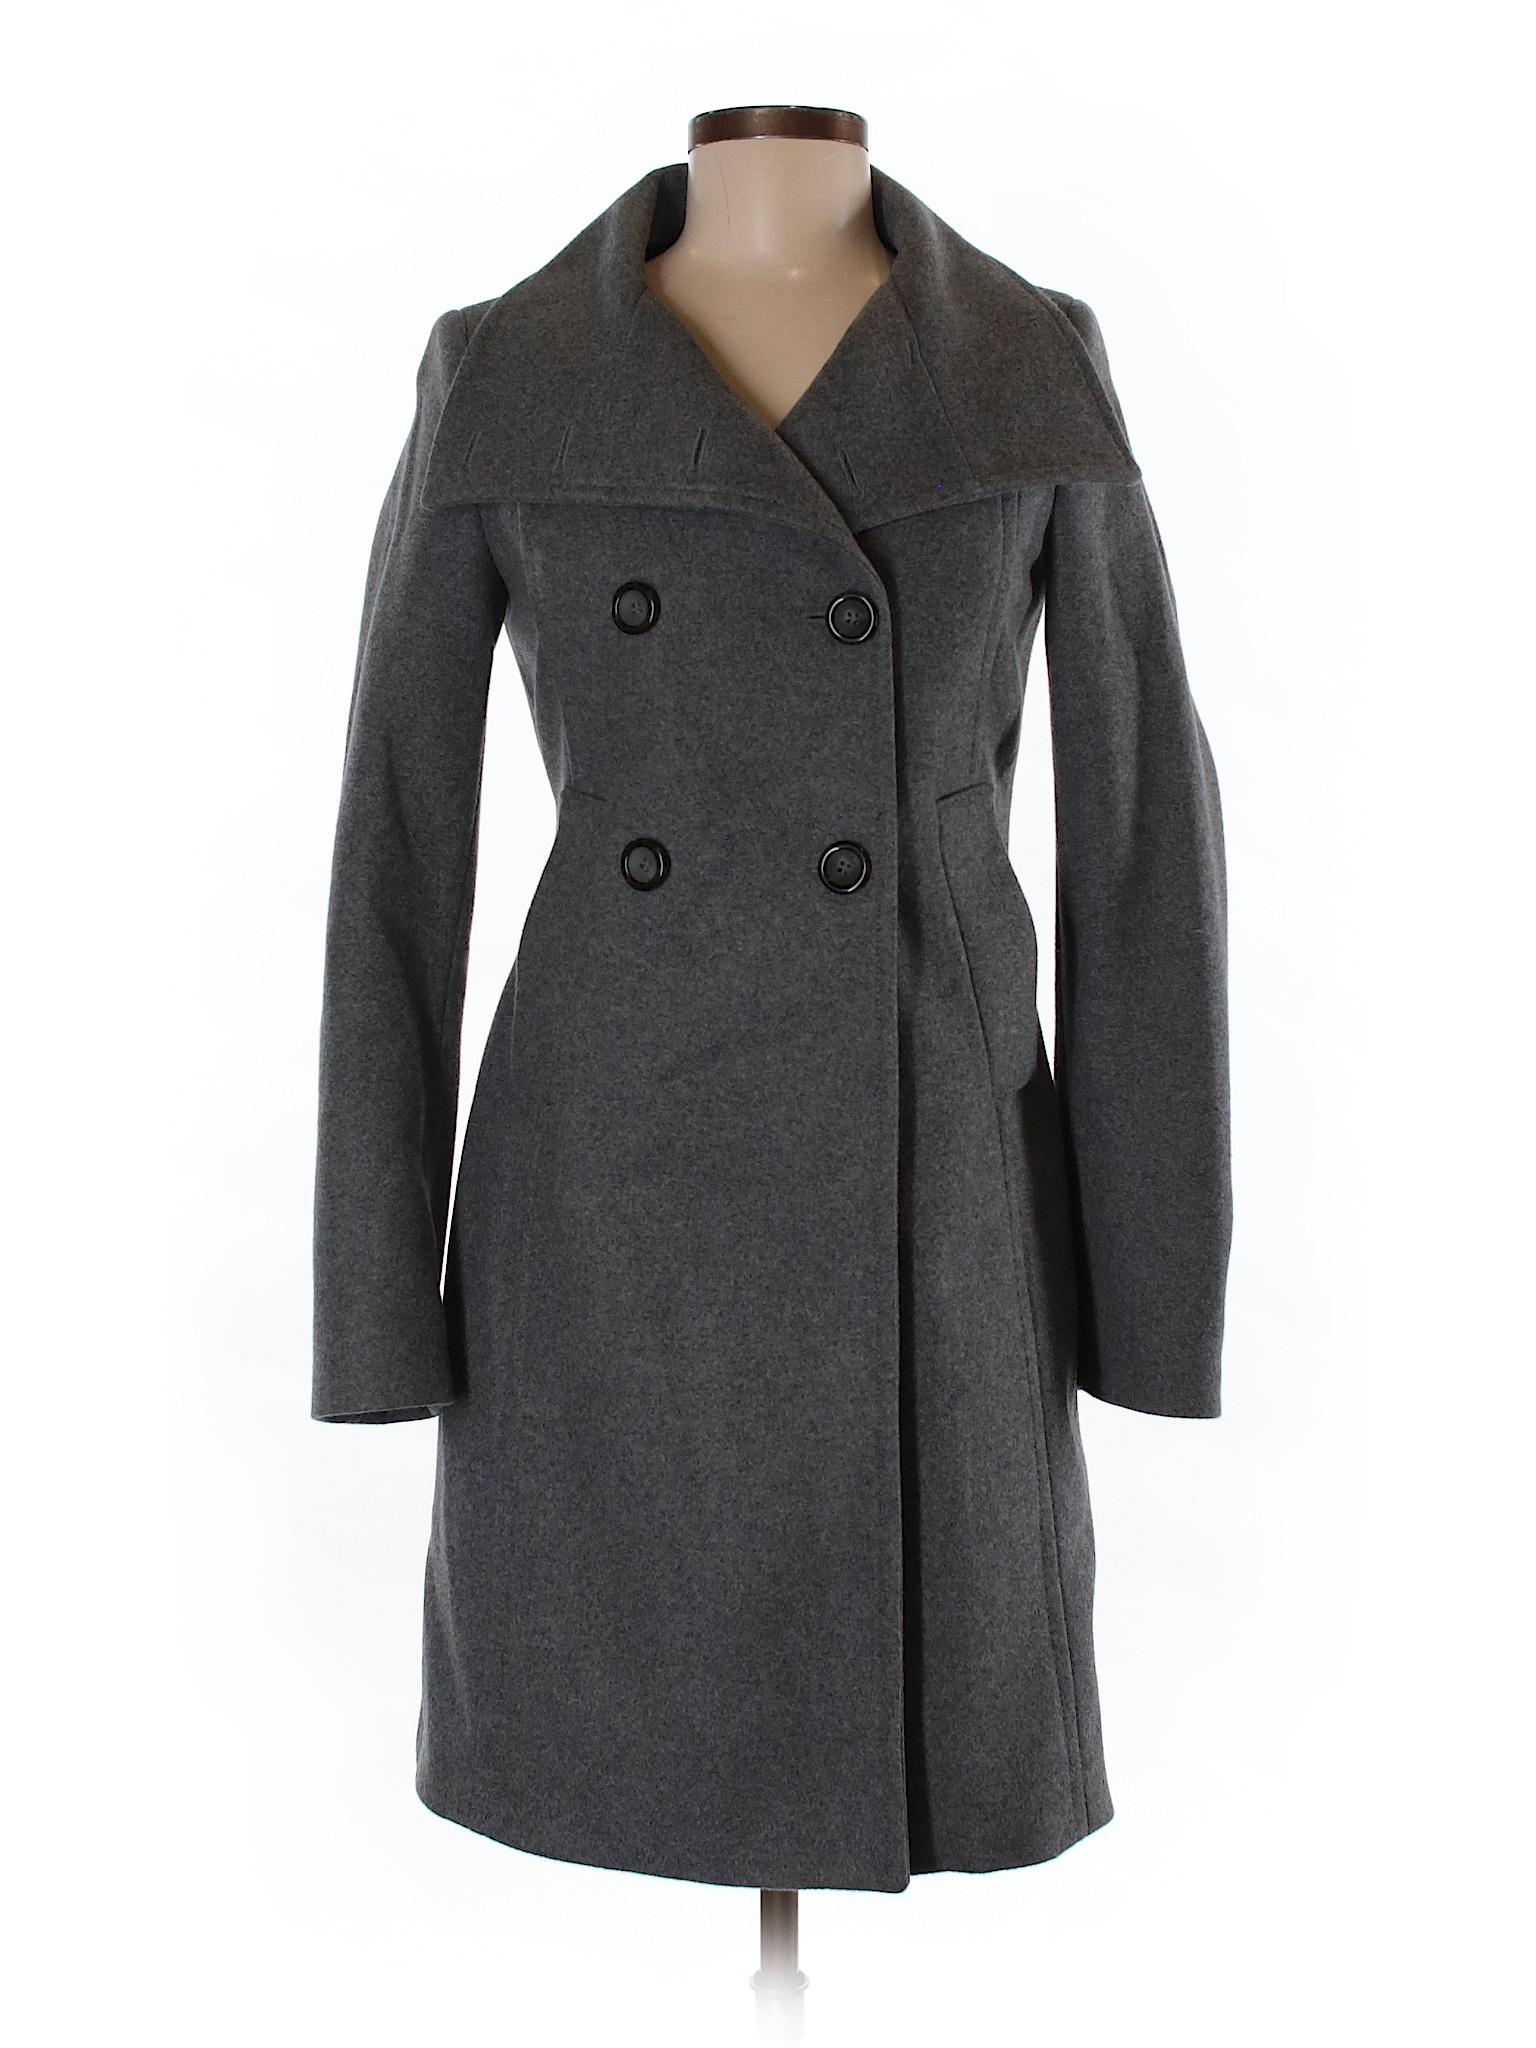 United Colors Of Benetton Wool Coat - 71% off only on thredUP